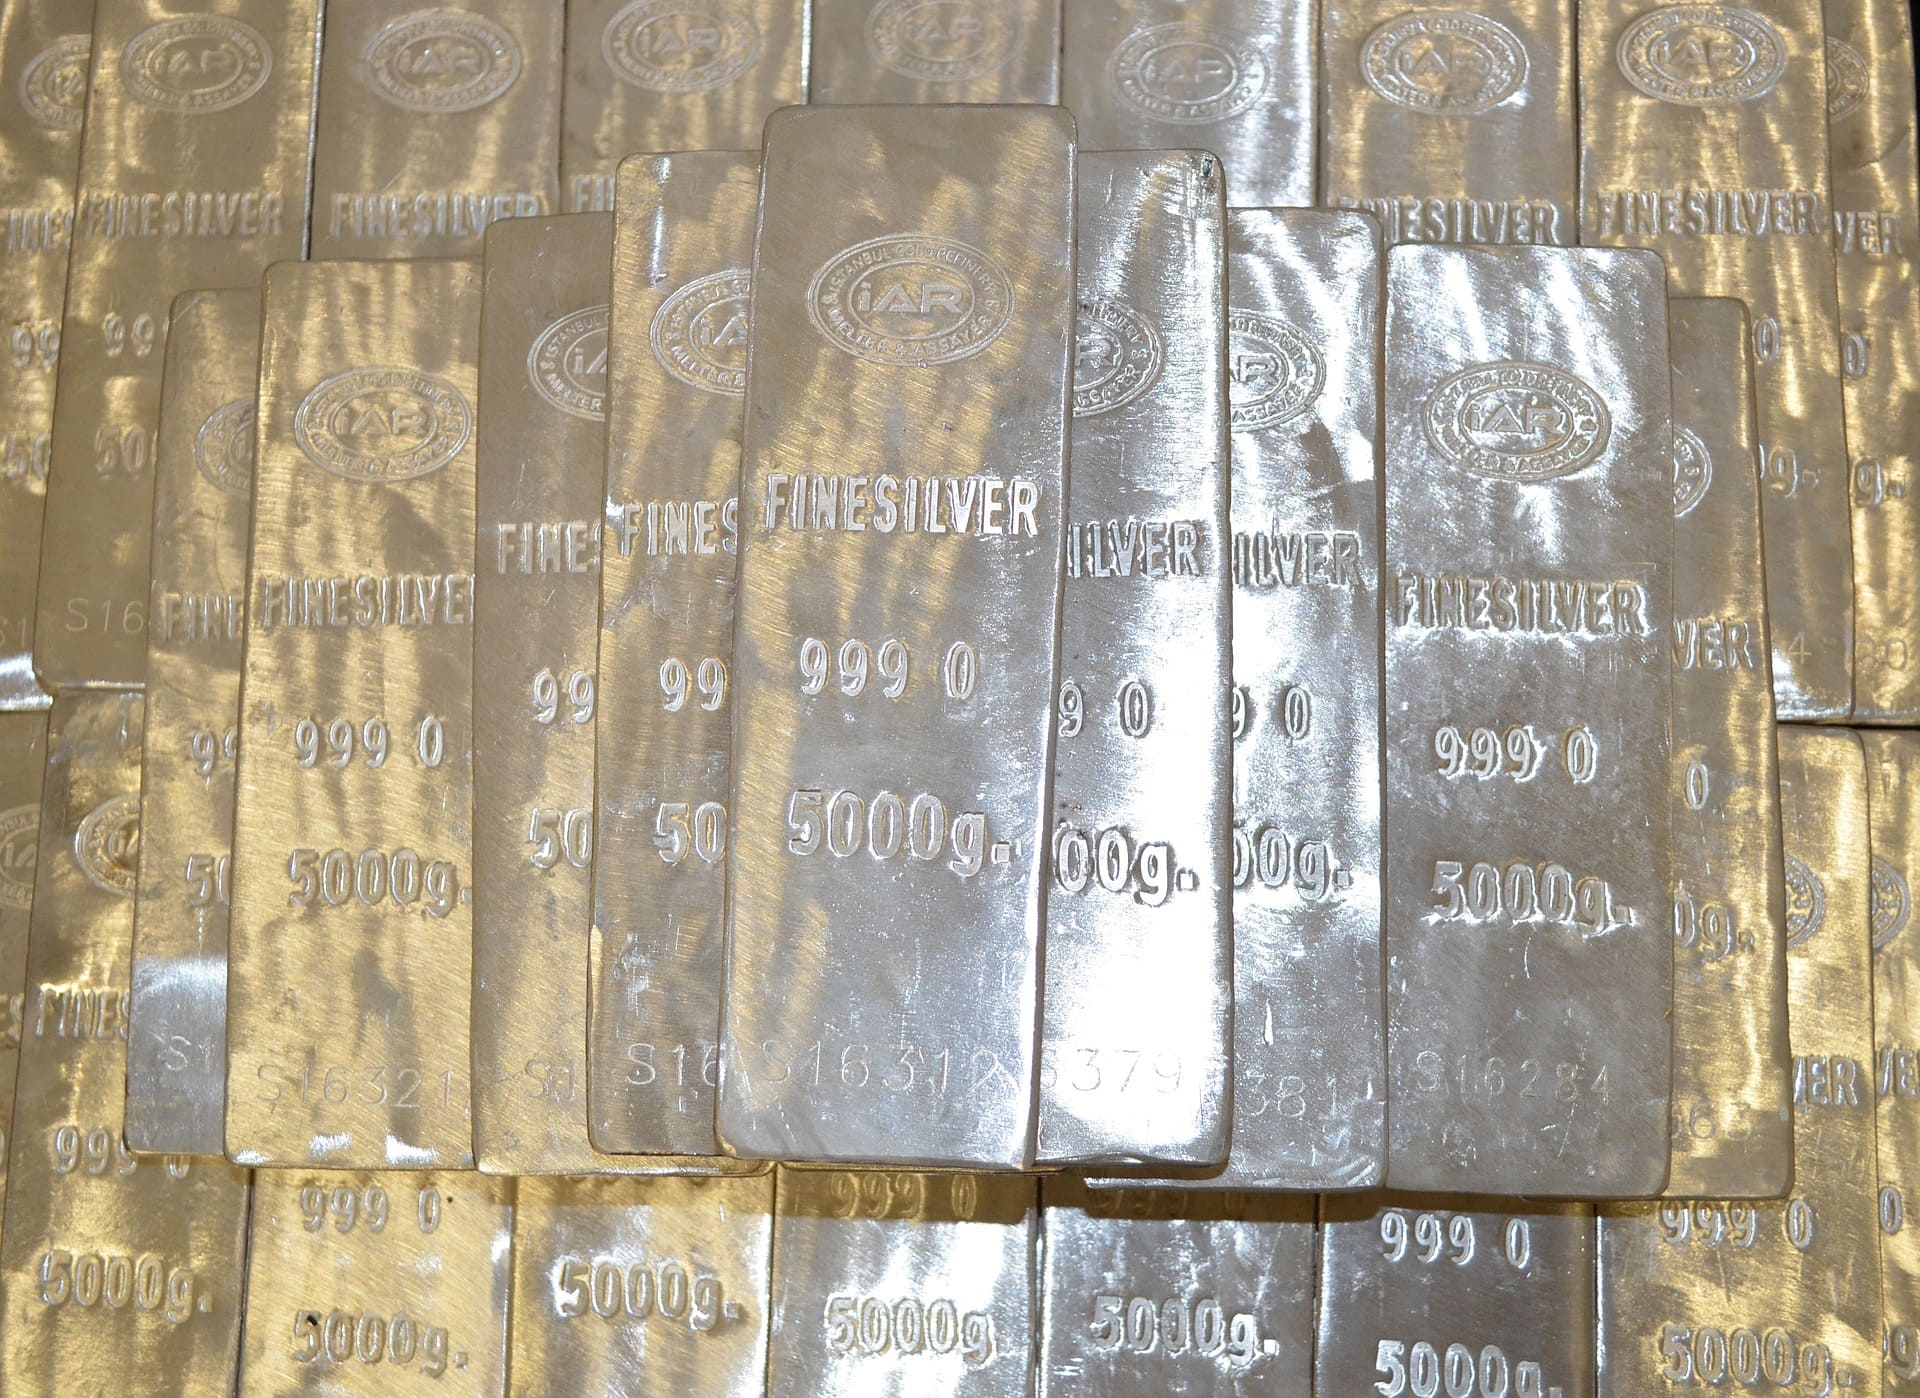 Several 5 kilo bars of silver stacked on top of each other